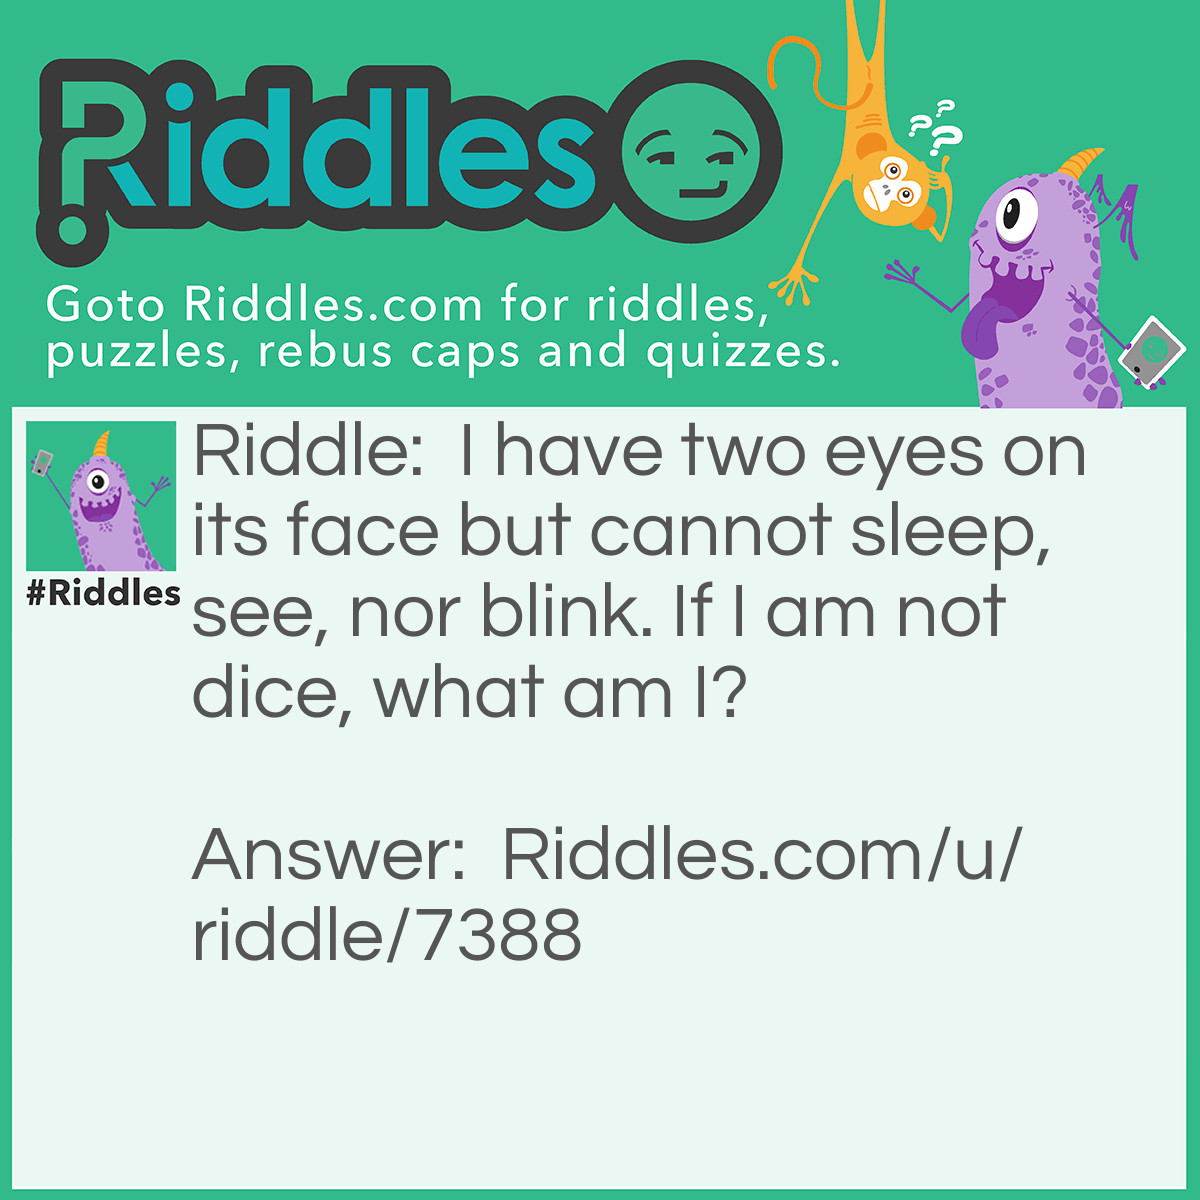 Riddle: I have two eyes on its face but cannot sleep, see, nor blink. If I am not dice, what am I? Answer: Dominoes.